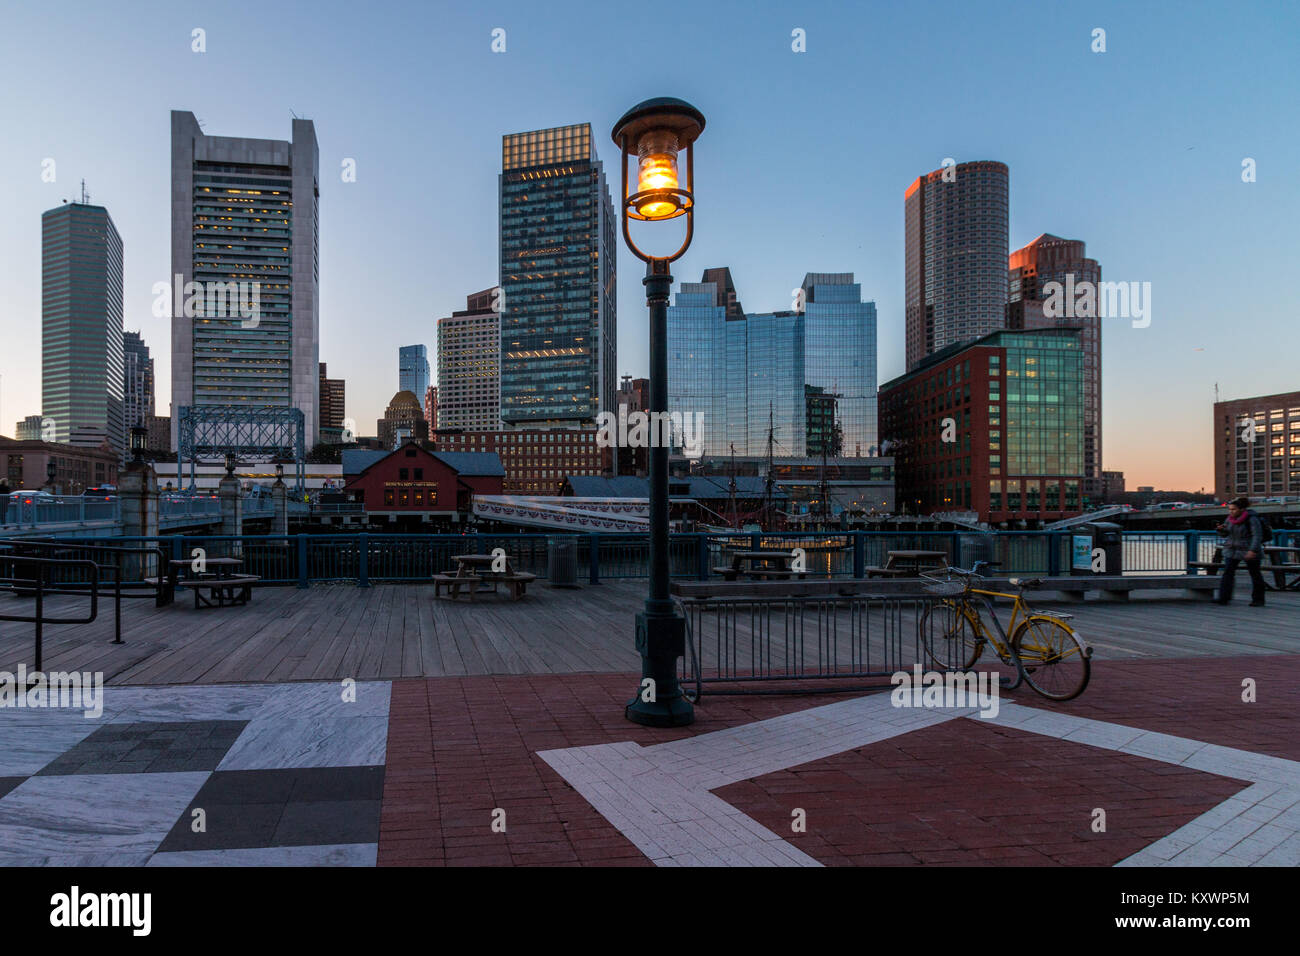 Boston city skyline tower and urban skyscrapers with lamp in foreground Stock Photo